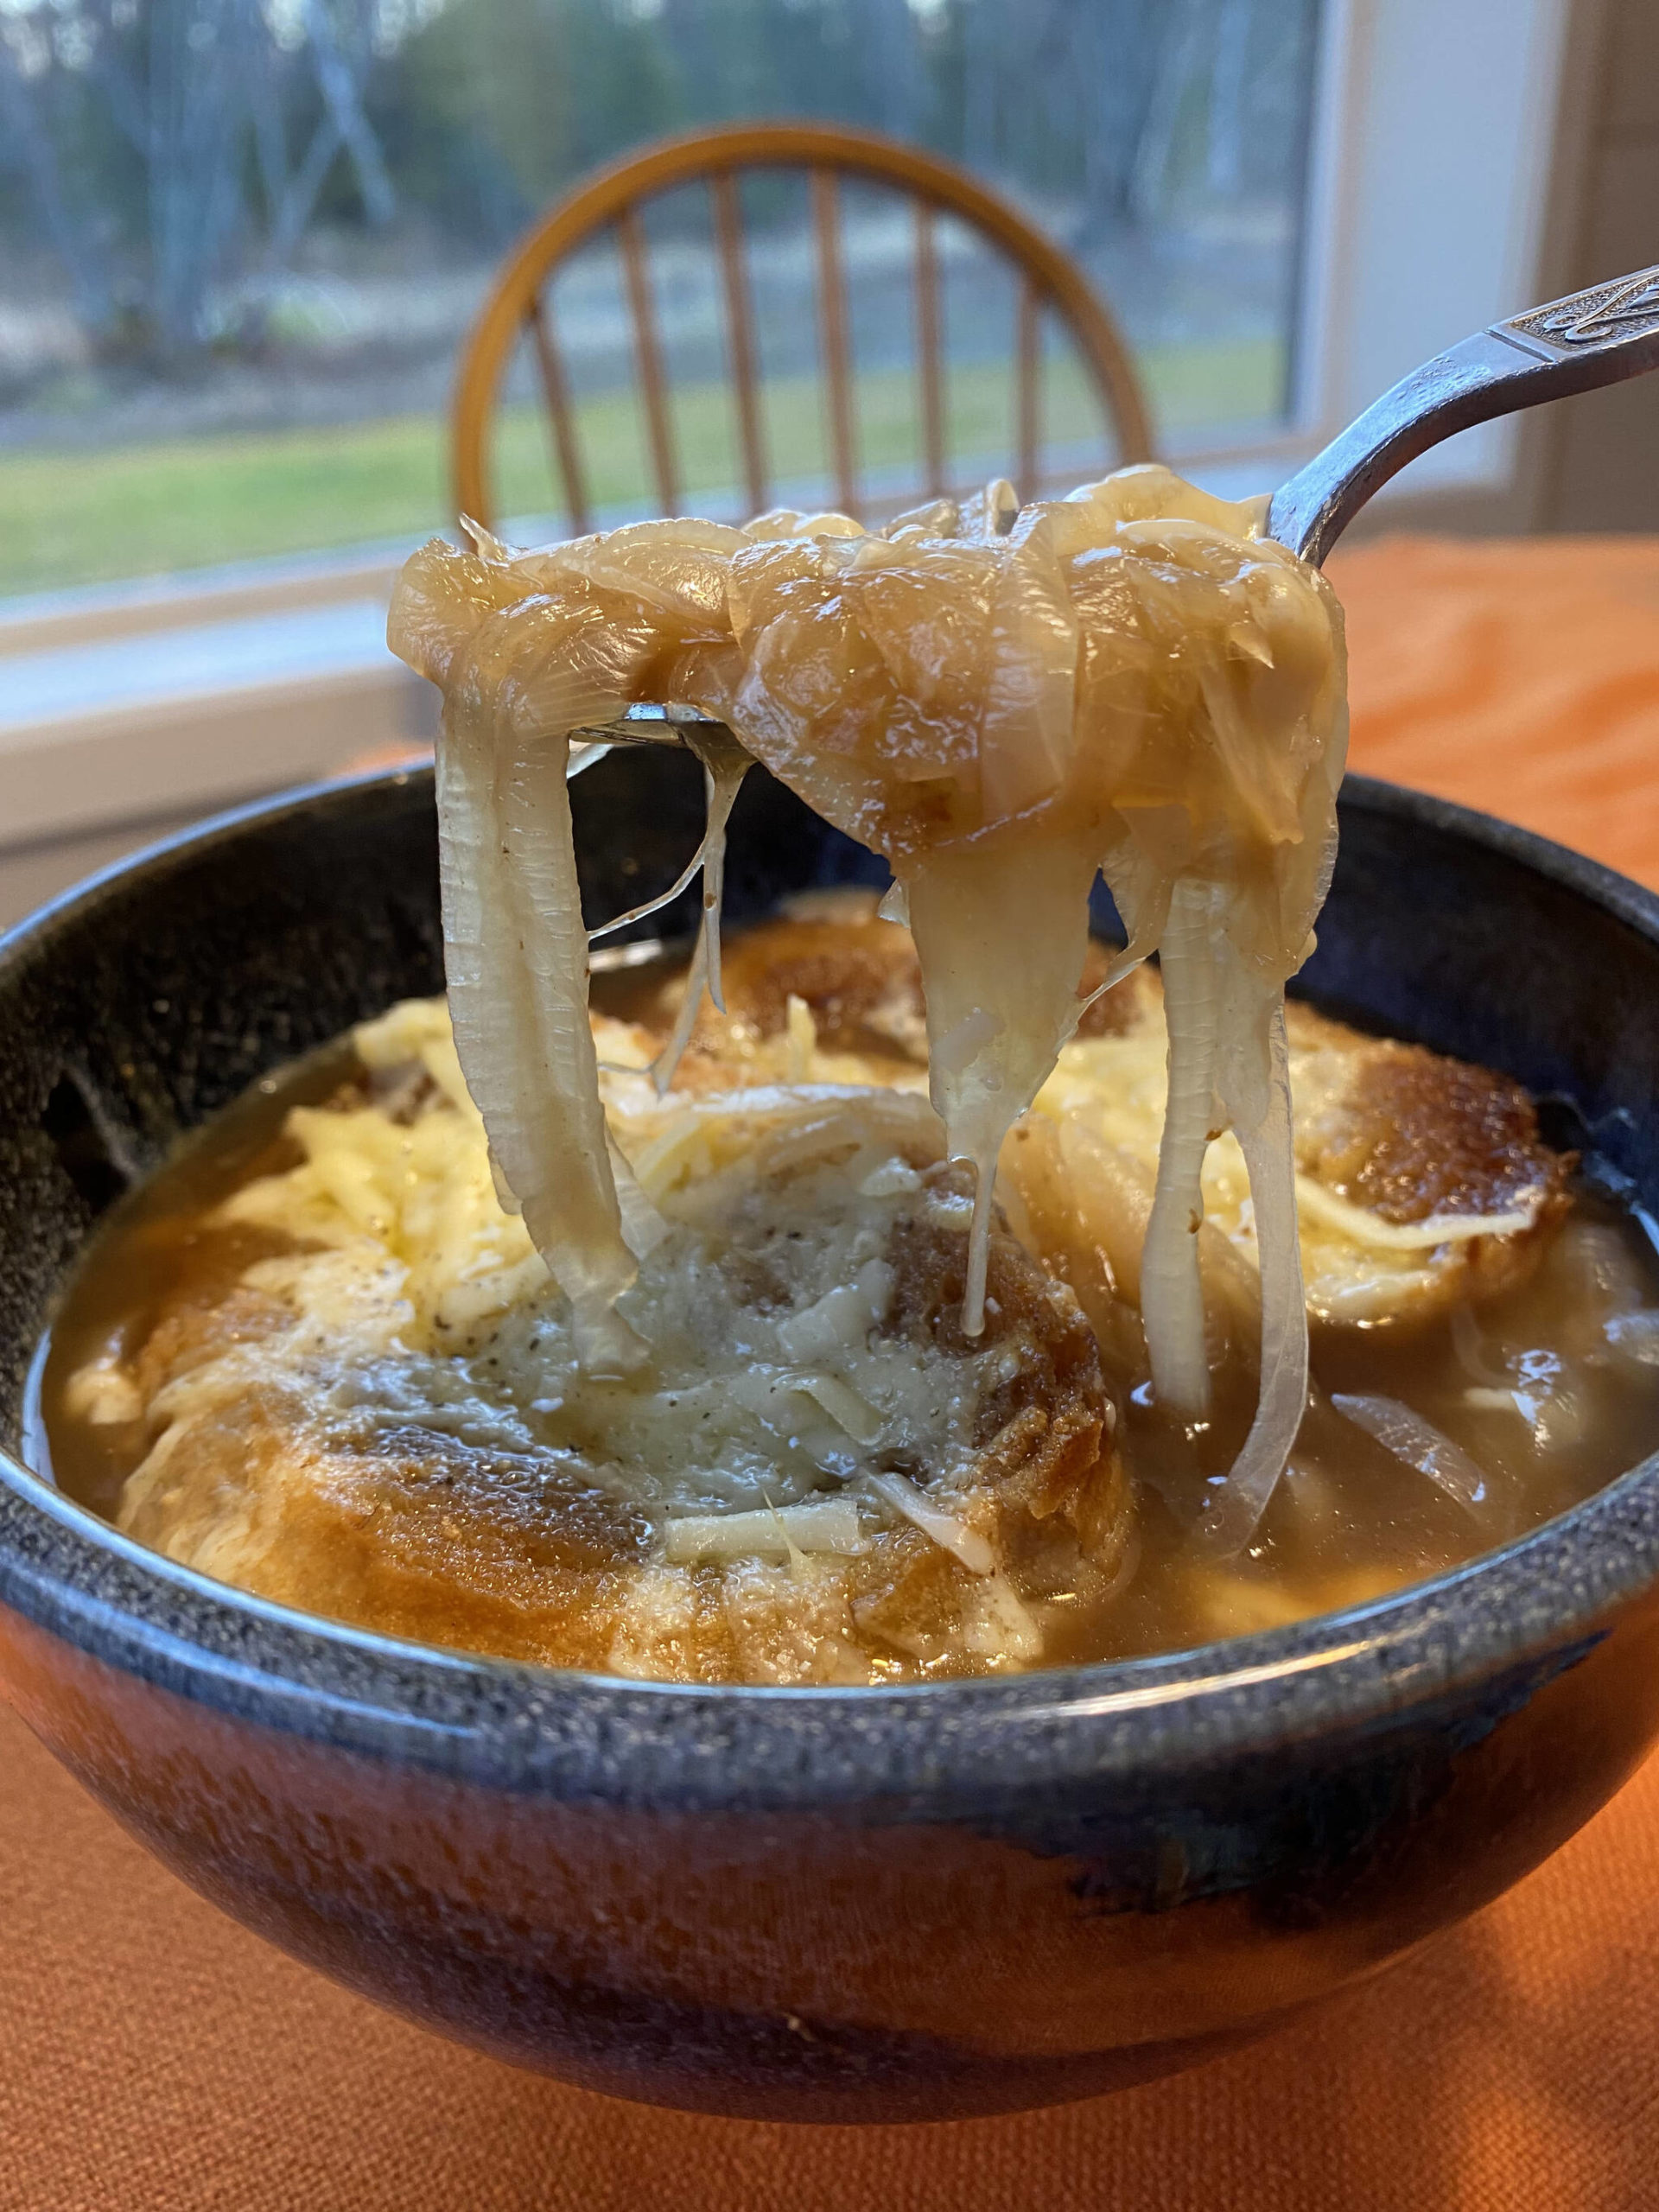 Onions are sauteed, doused in broth and then topped off with cheese and bread in this recipe for French Onion Soup. (Photo by Tressa Dale/Peninsula Clarion)